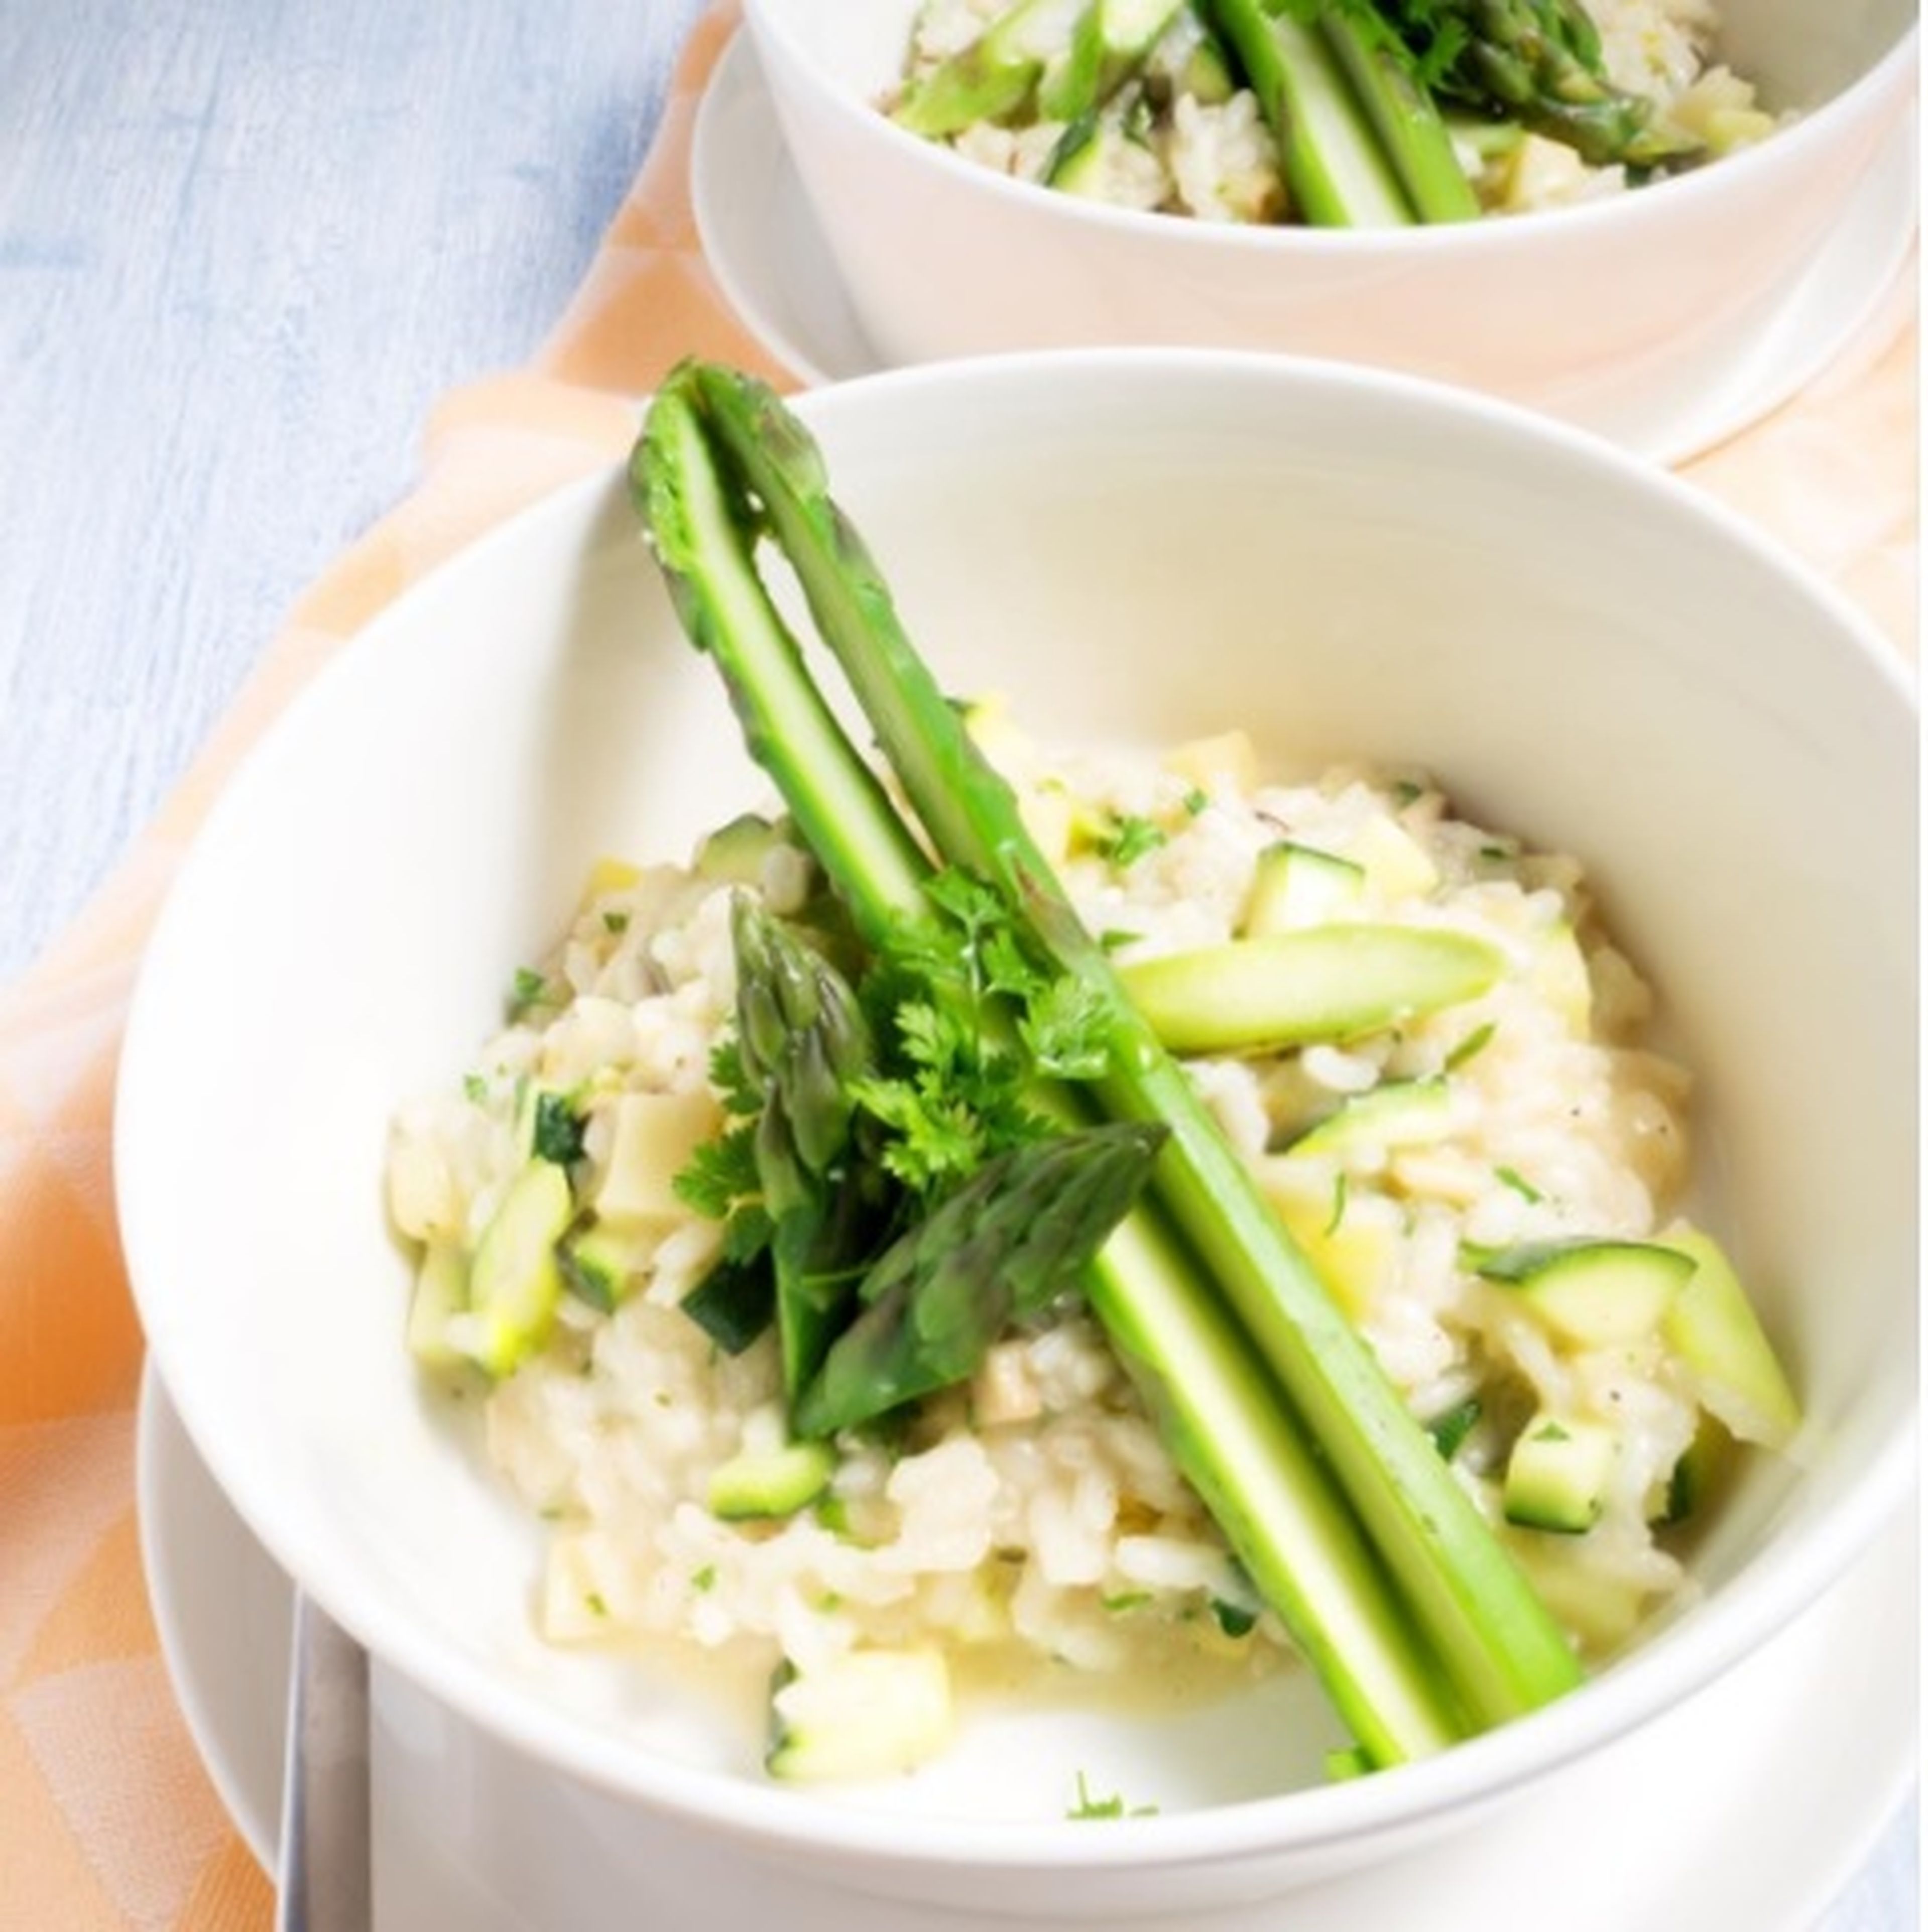 Spargelrisotto